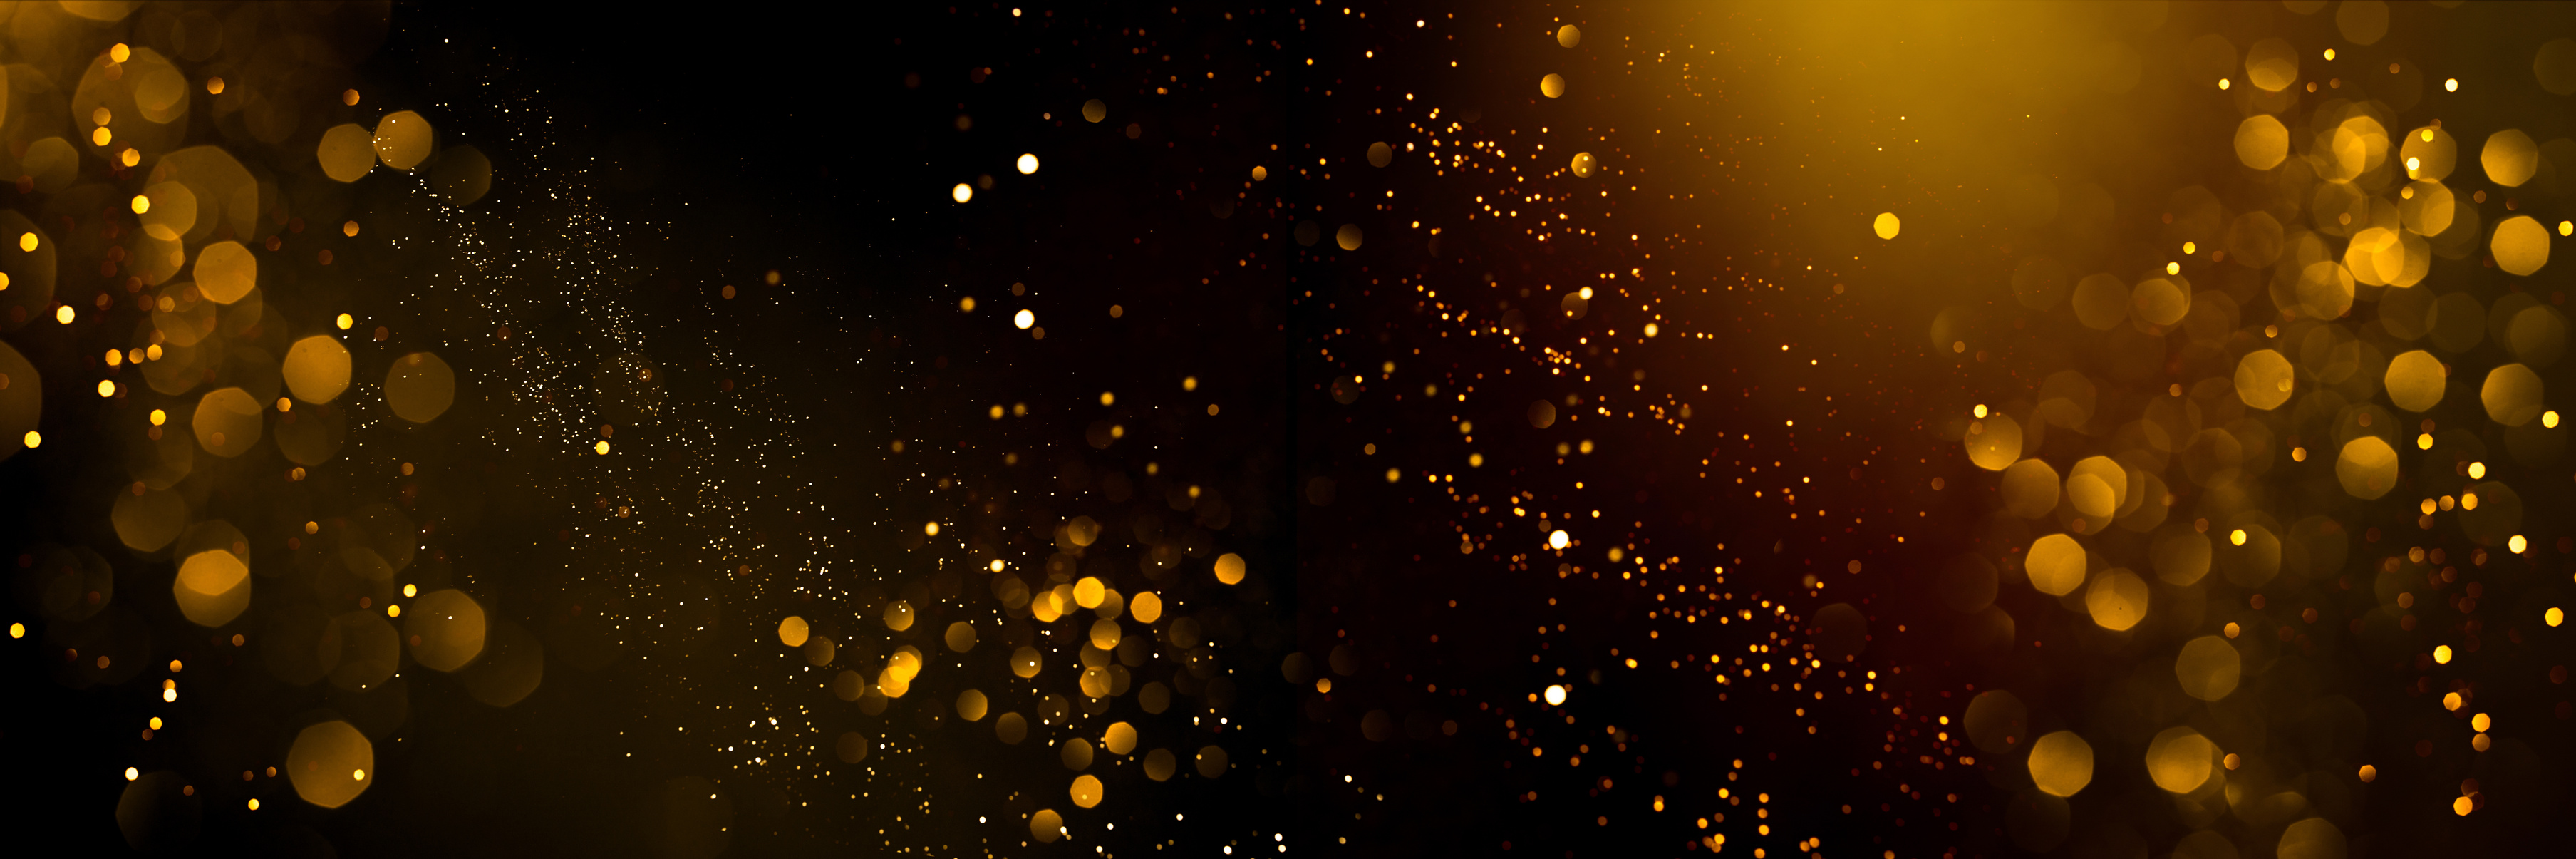 Golden Abstract Bokeh on Black Background